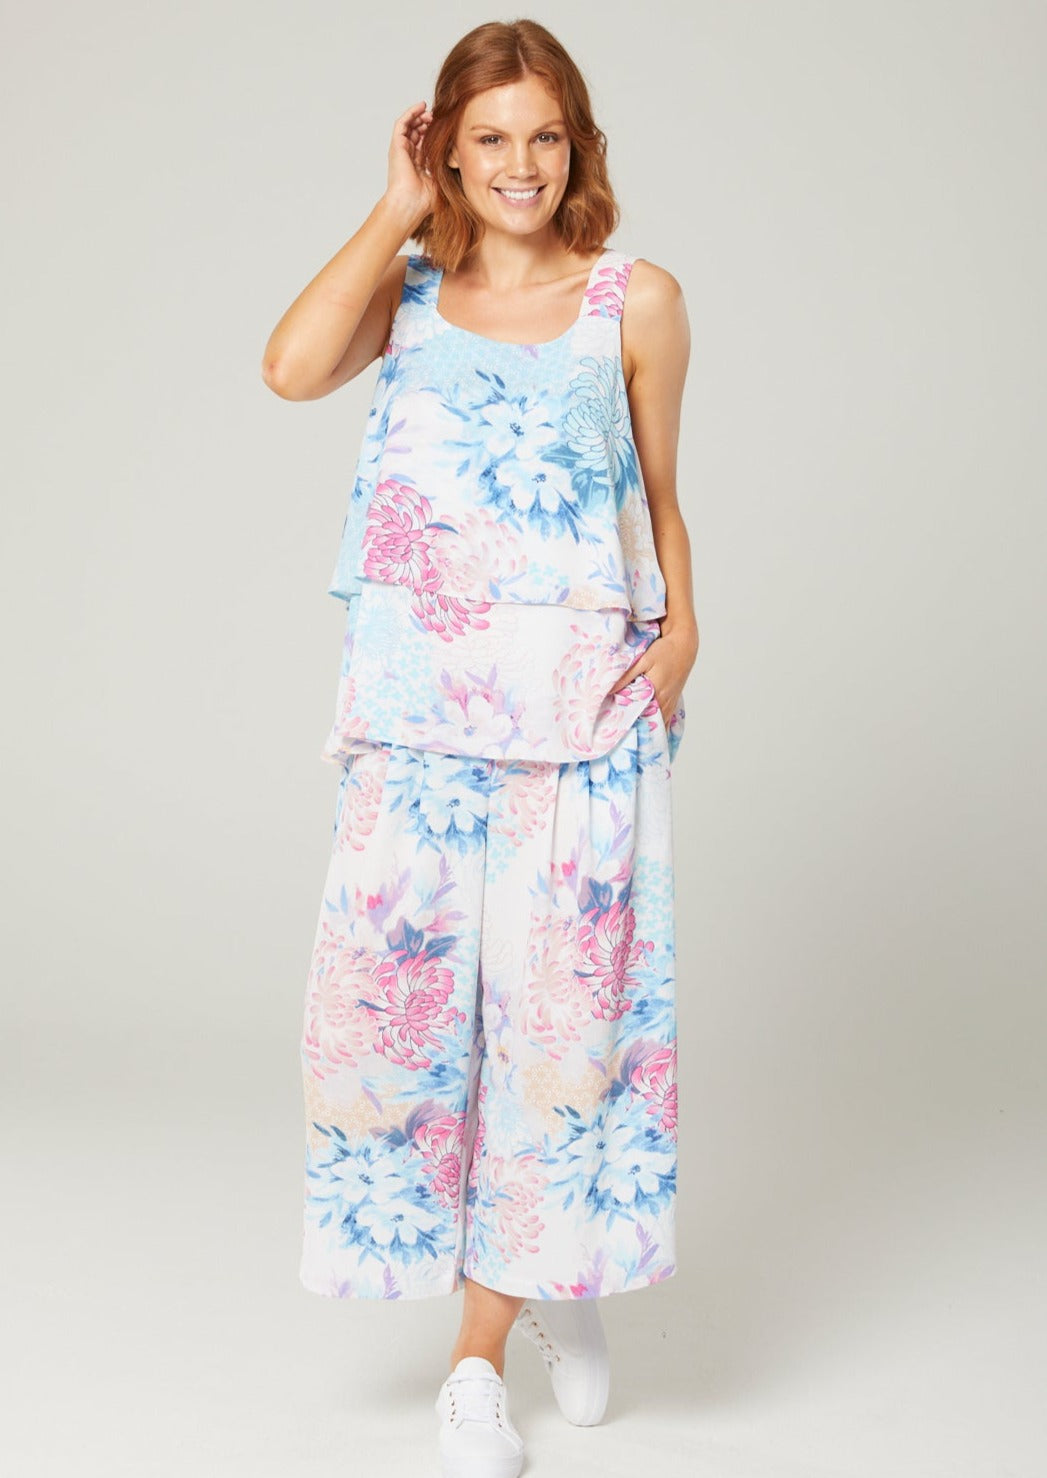 Tiers Layer Camisole in Peony